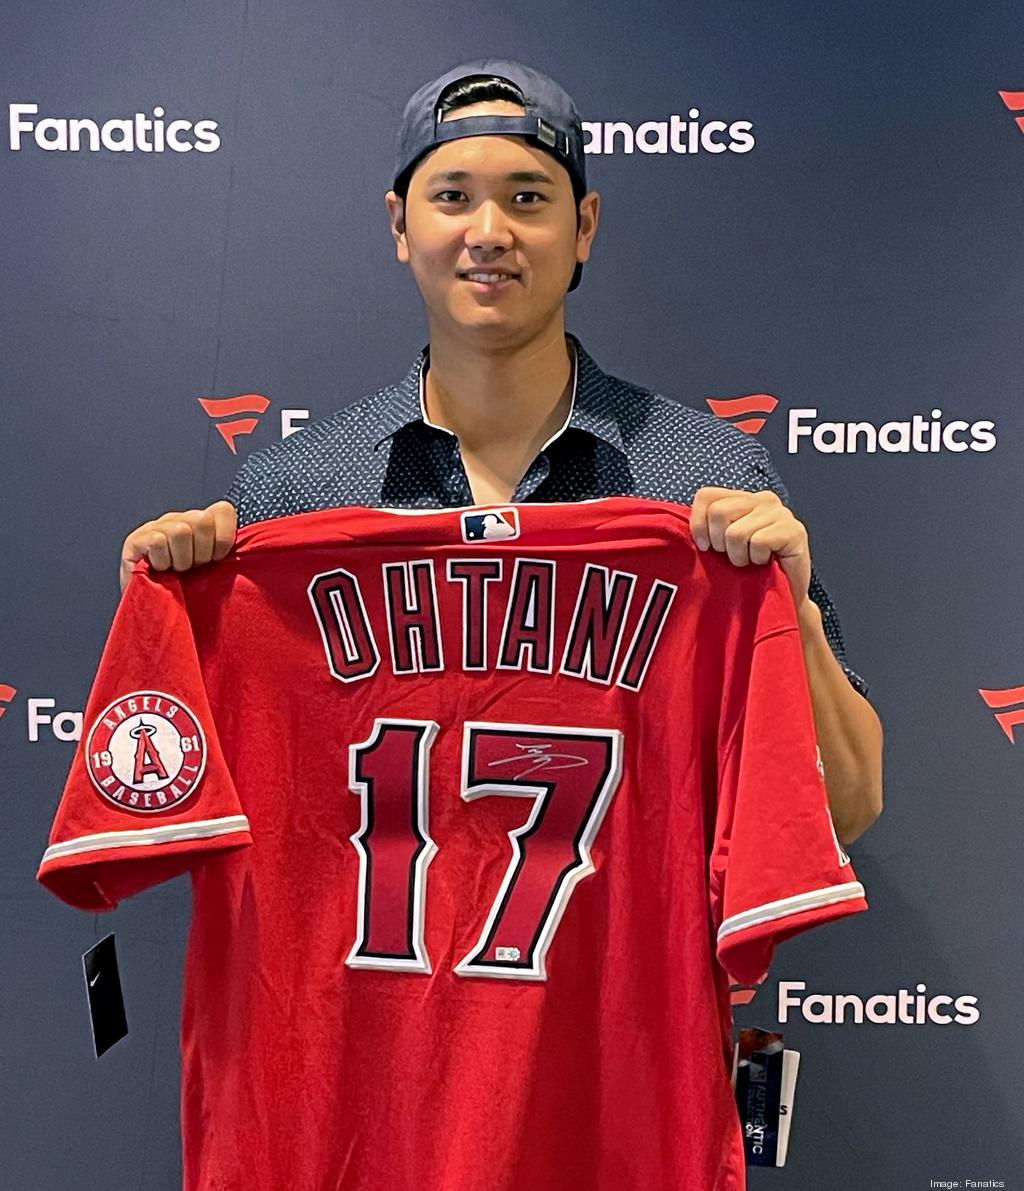 Fanatics signs Shohei Ohtani to licensing deal - Jacksonville